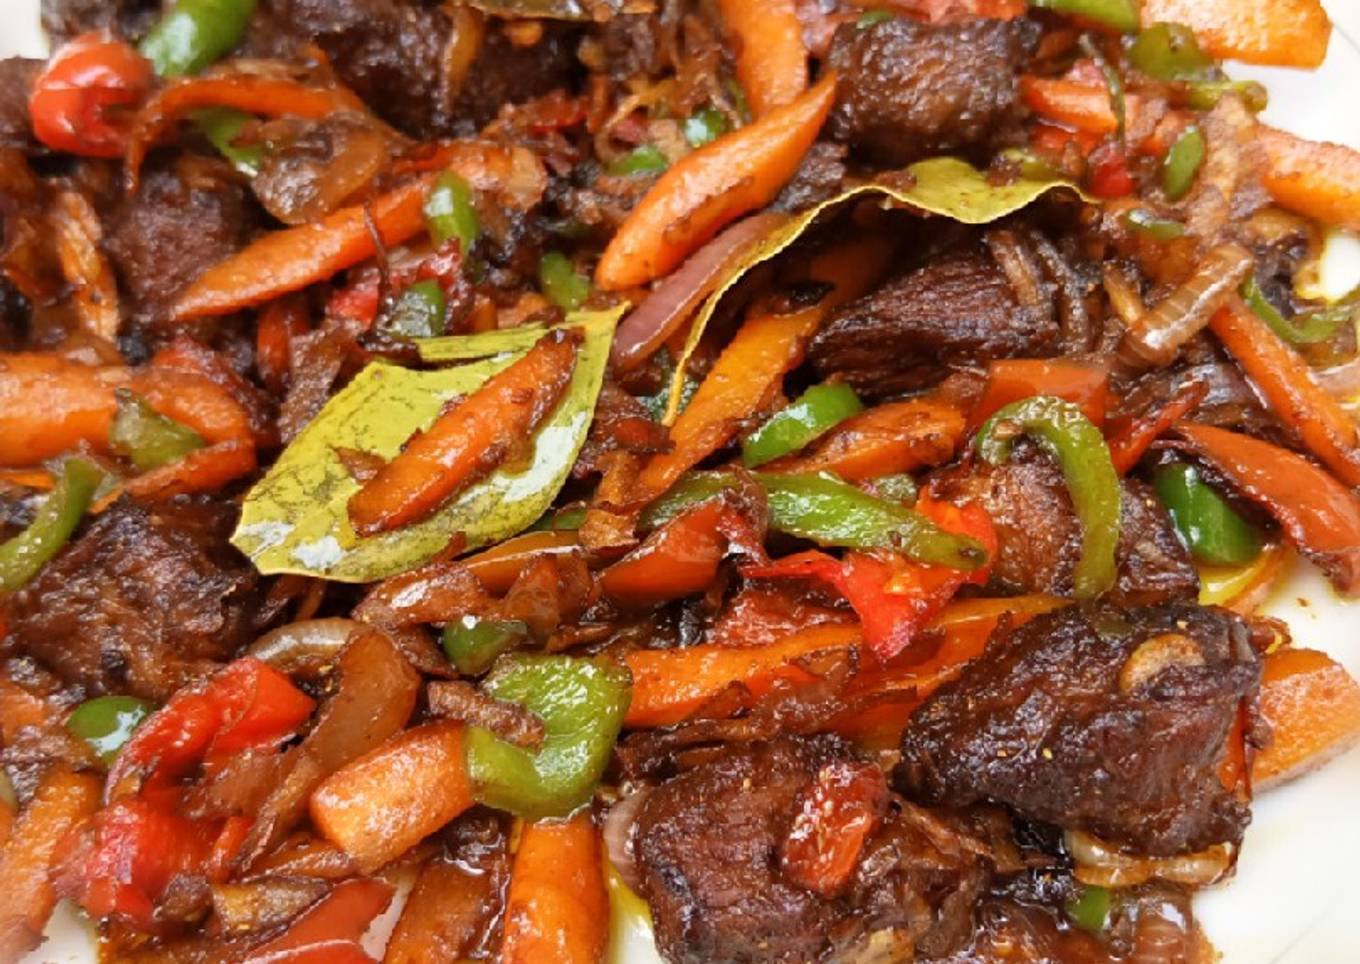 Beef and coconut stir fry